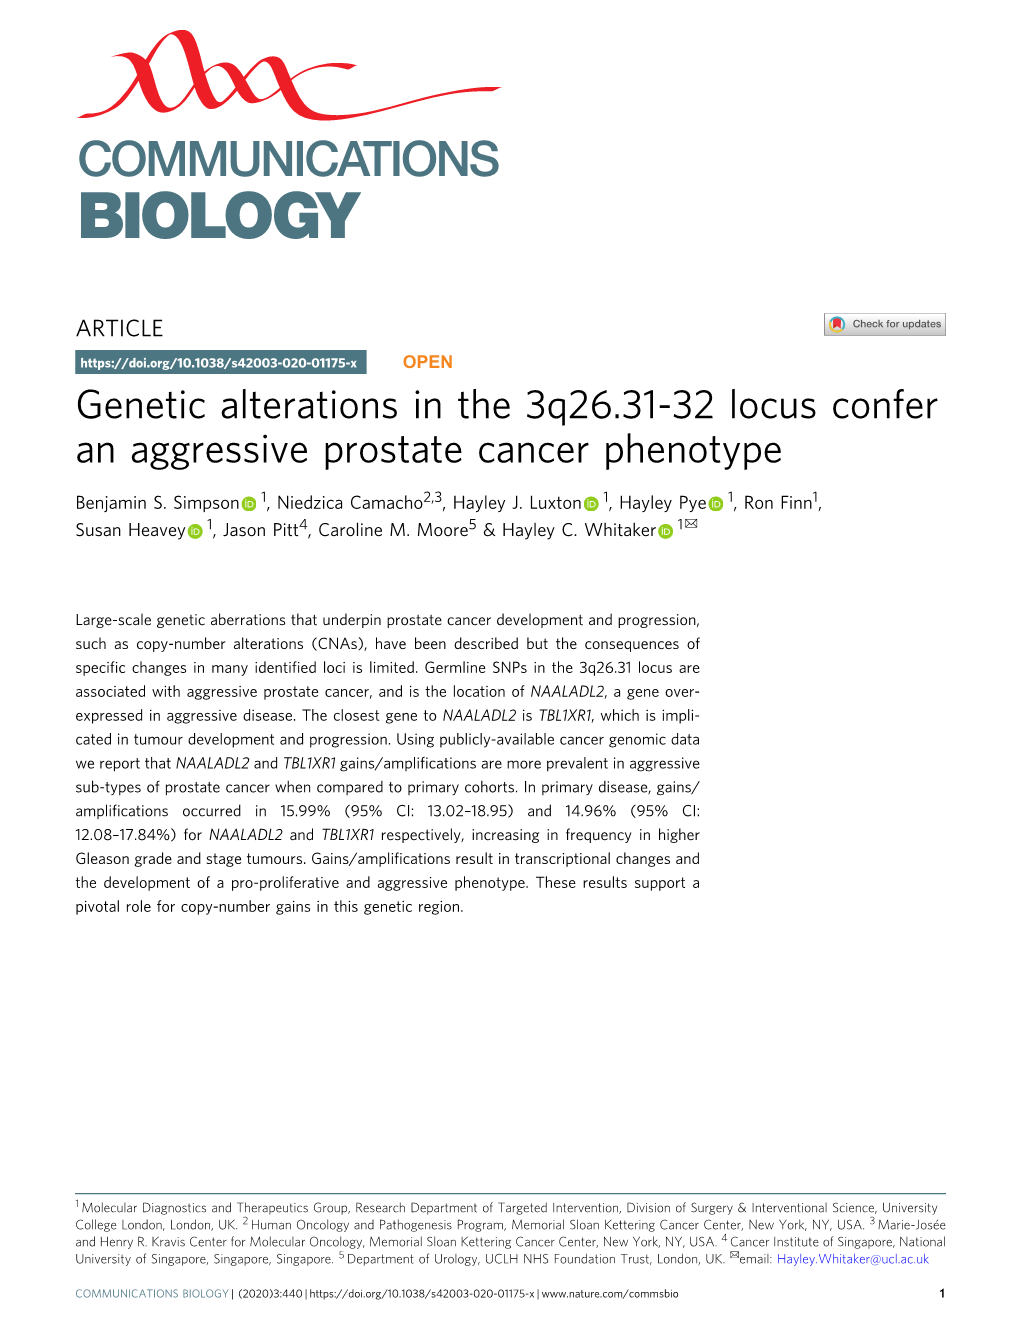 Genetic Alterations in the 3Q26.31-32 Locus Confer an Aggressive Prostate Cancer Phenotype